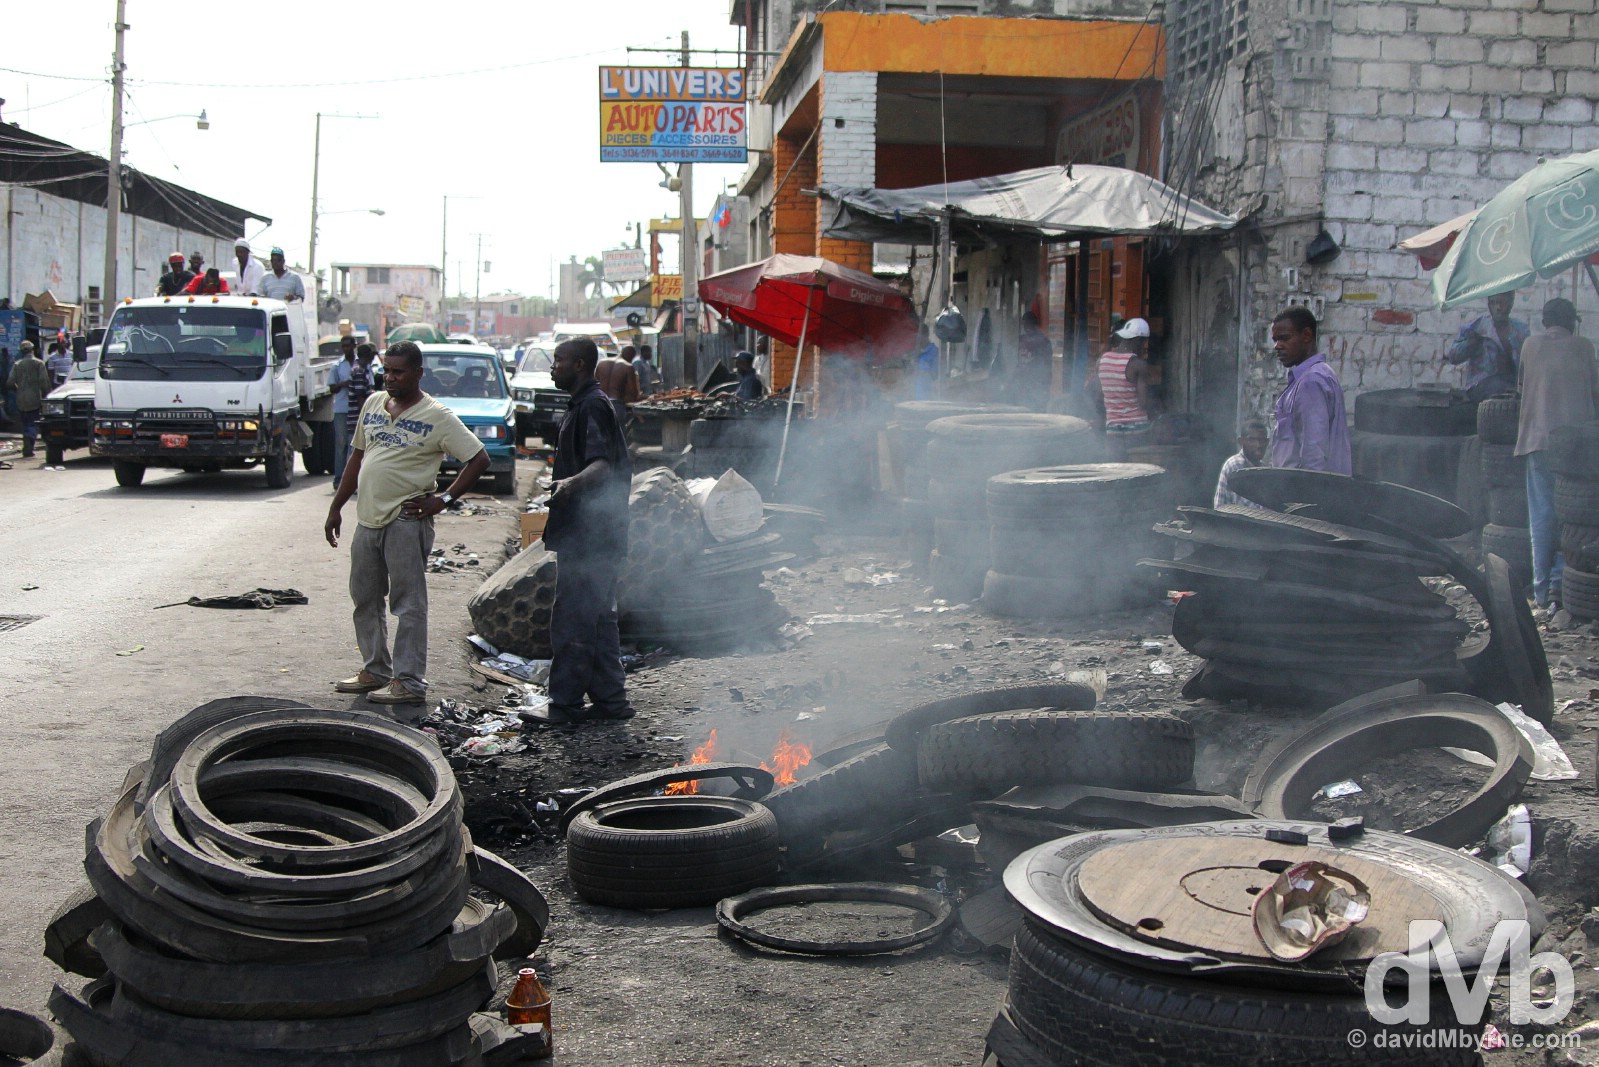 On the streets of Port-Au-Prince, Haiti. May 17, 2015.